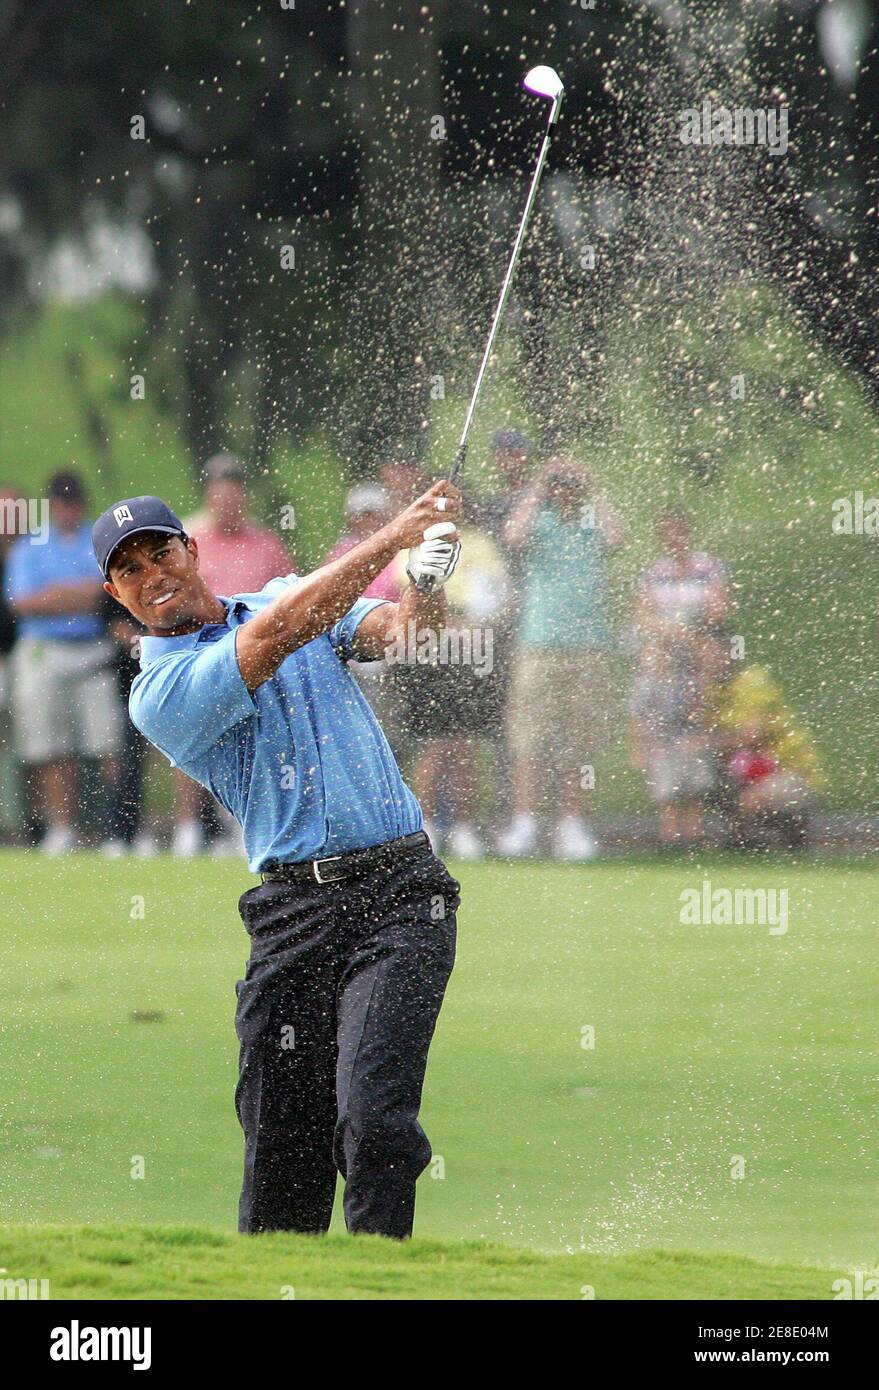 Tiger Woods hits out of a bunker on the 15th hole during the first round of play at The Players Championship golf tournament in Ponte Vedra Beach, Florida May 10, 2007. REUTERS/Rick Fowler (UNITED STATES) Stock Photo